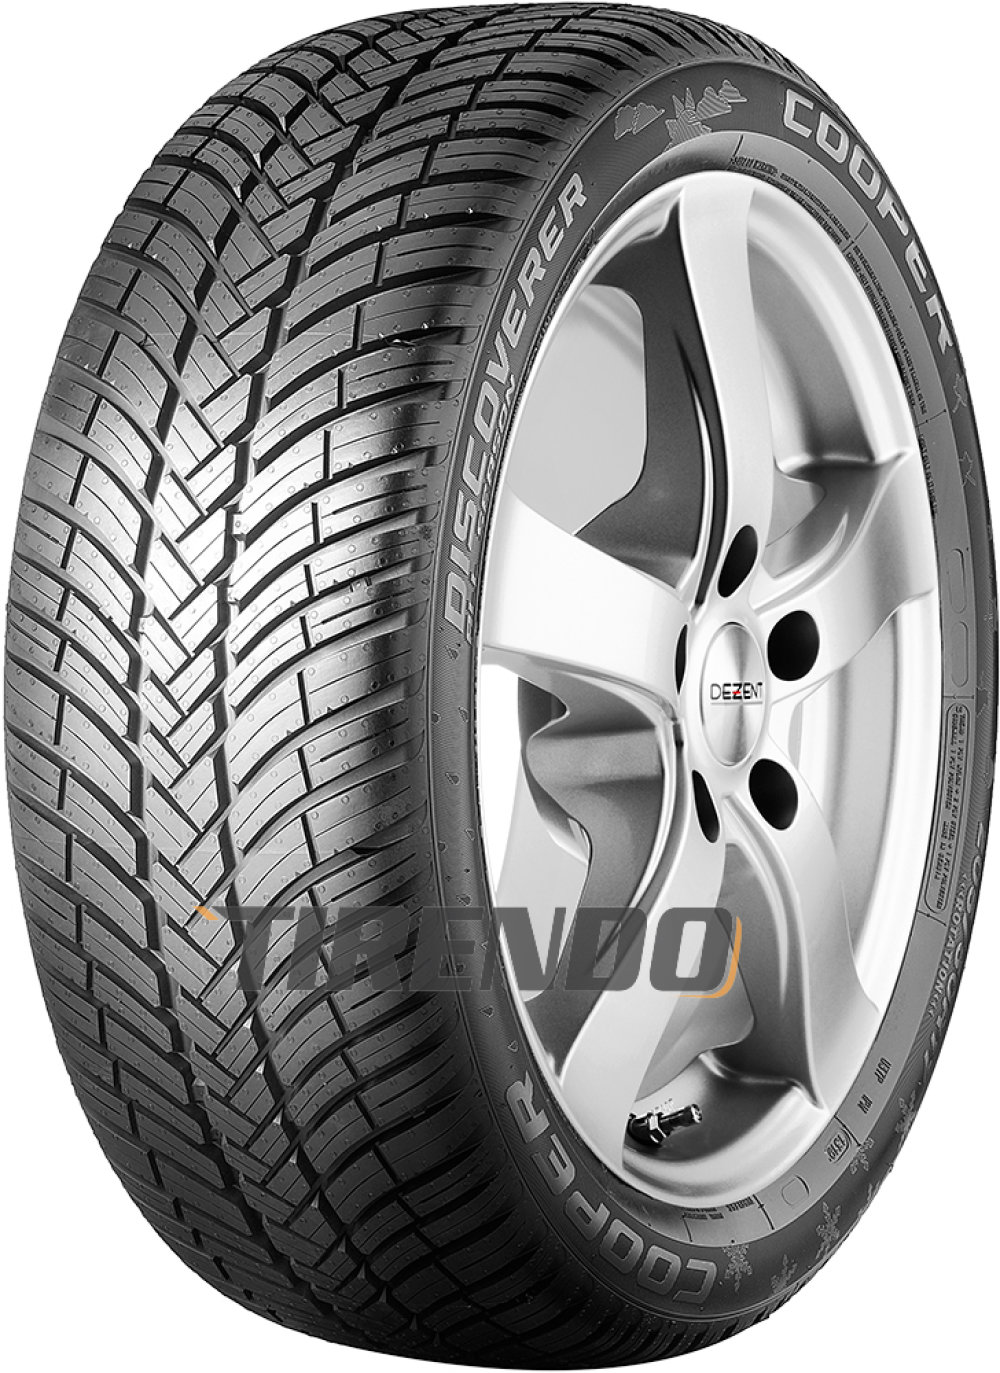 Image of Cooper Discoverer All Season ( 215/50 R17 95W XL )